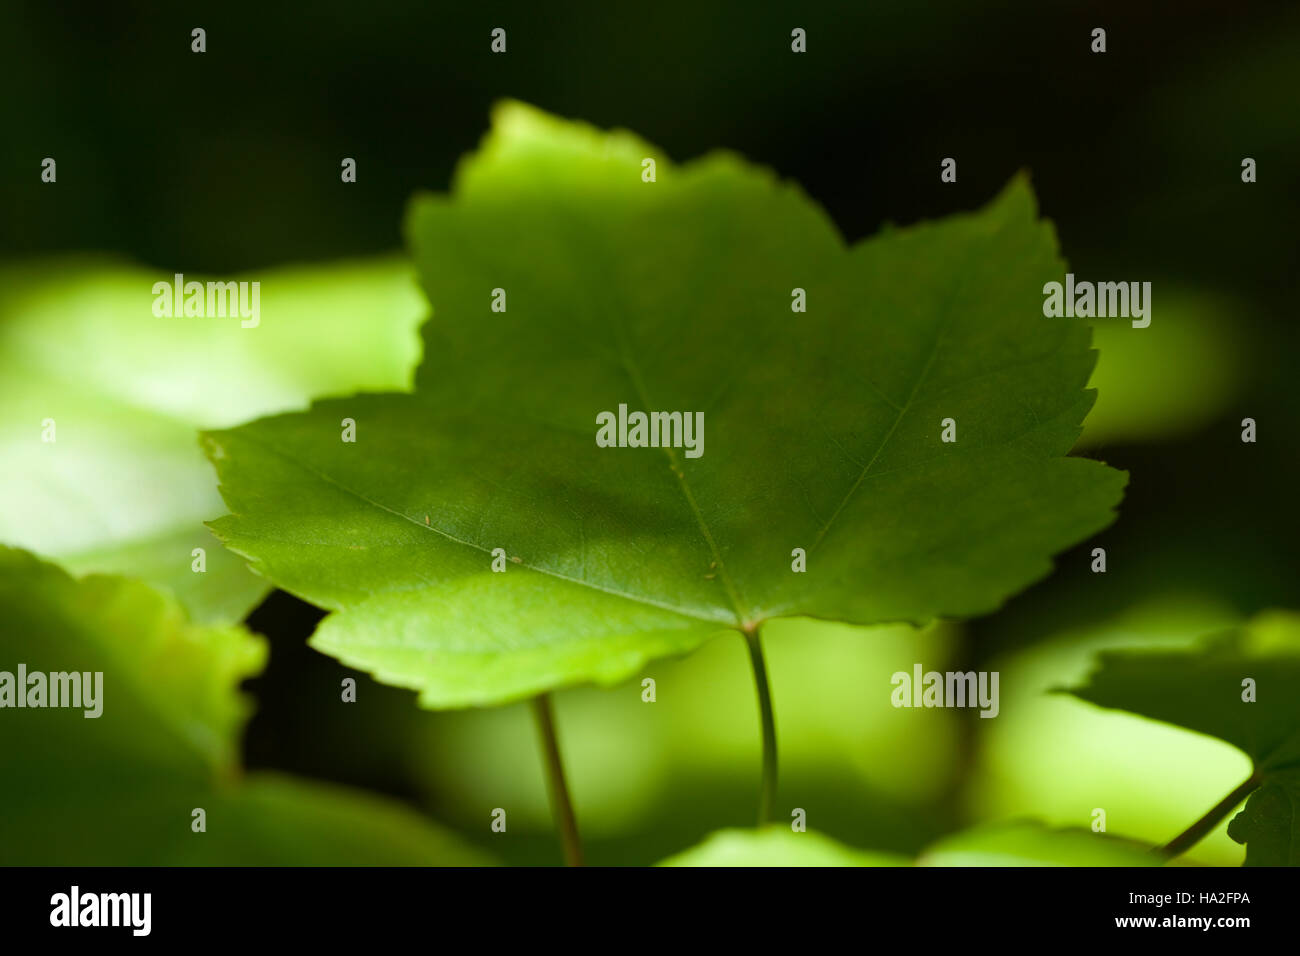 green leaf maple (Acer rubrum) on blurred background Stock Photo